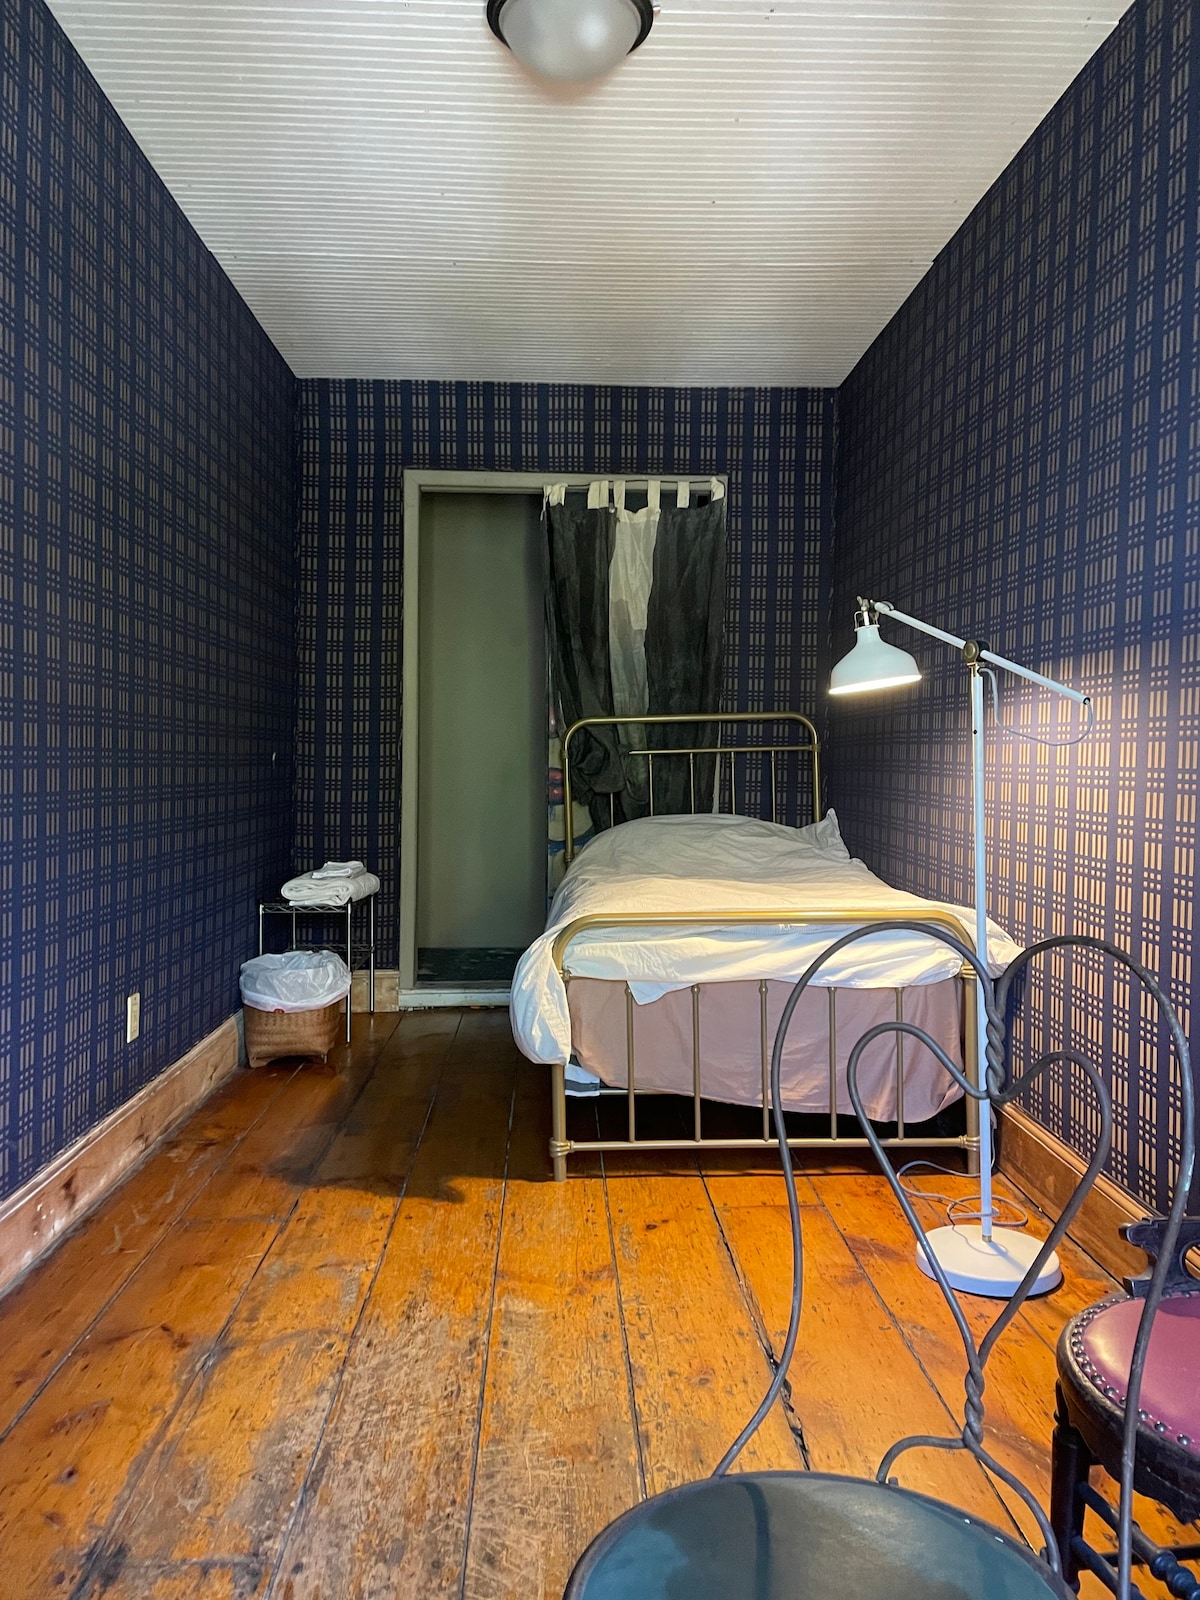 A private bedroom in Brooklyn heights